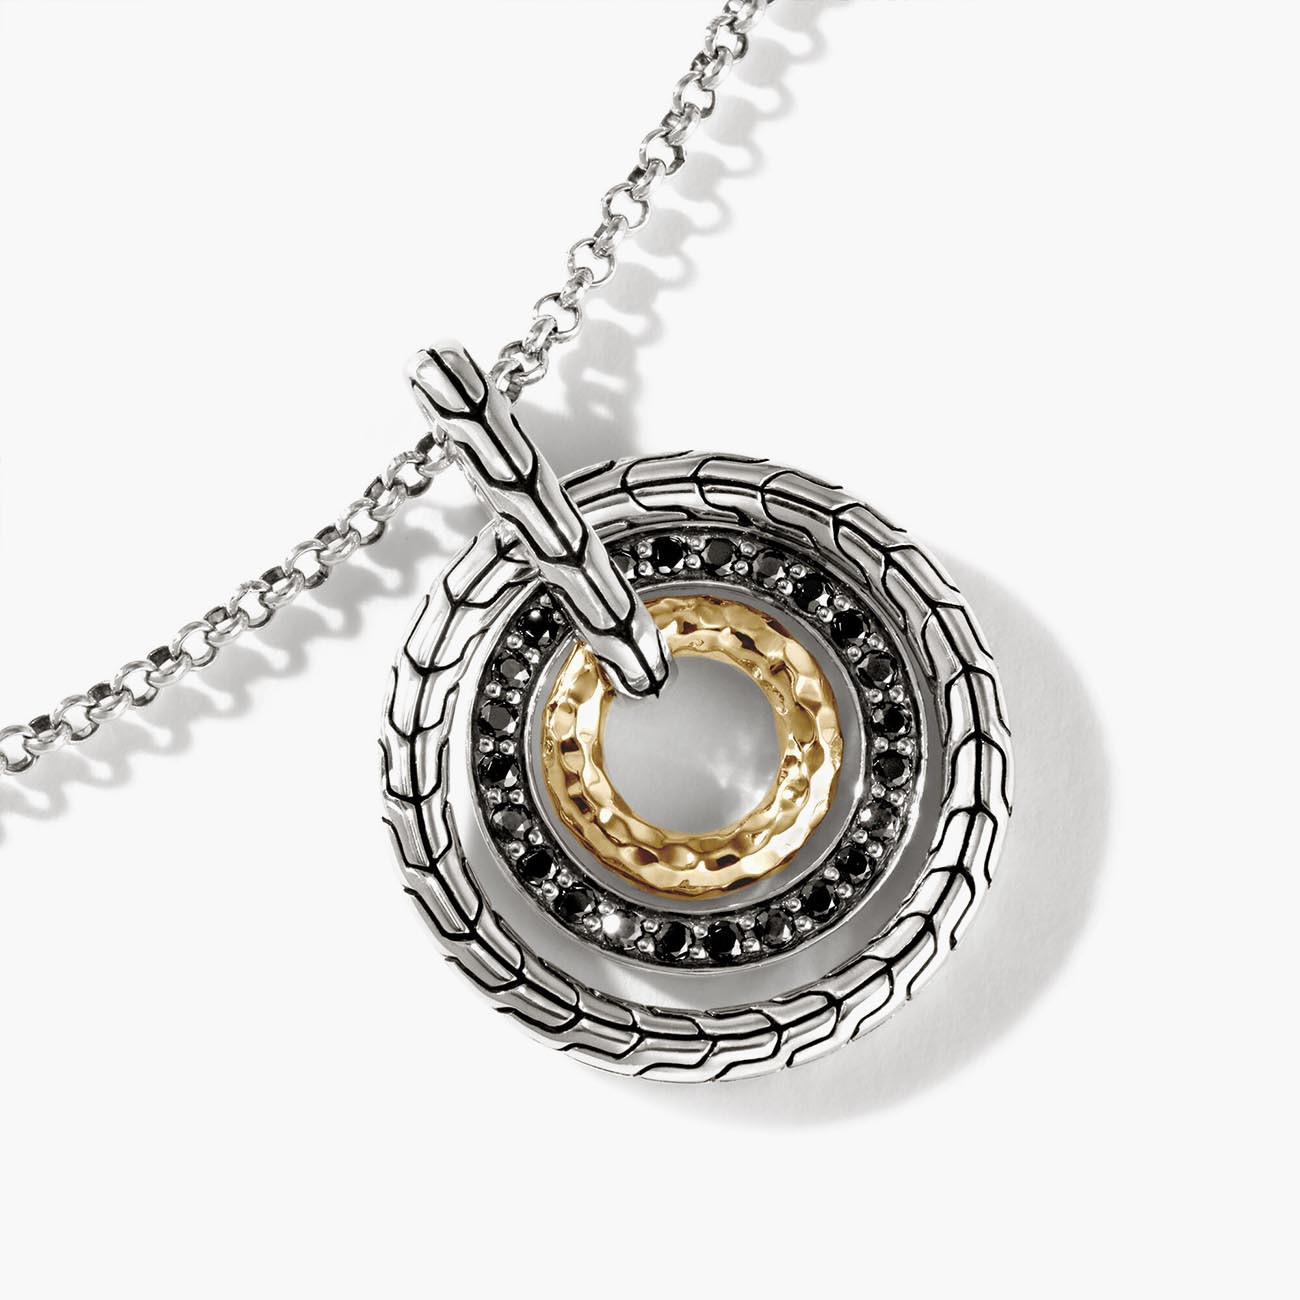 John Hardy Classic Chain Hammered 18k Gold and Silver Pendant